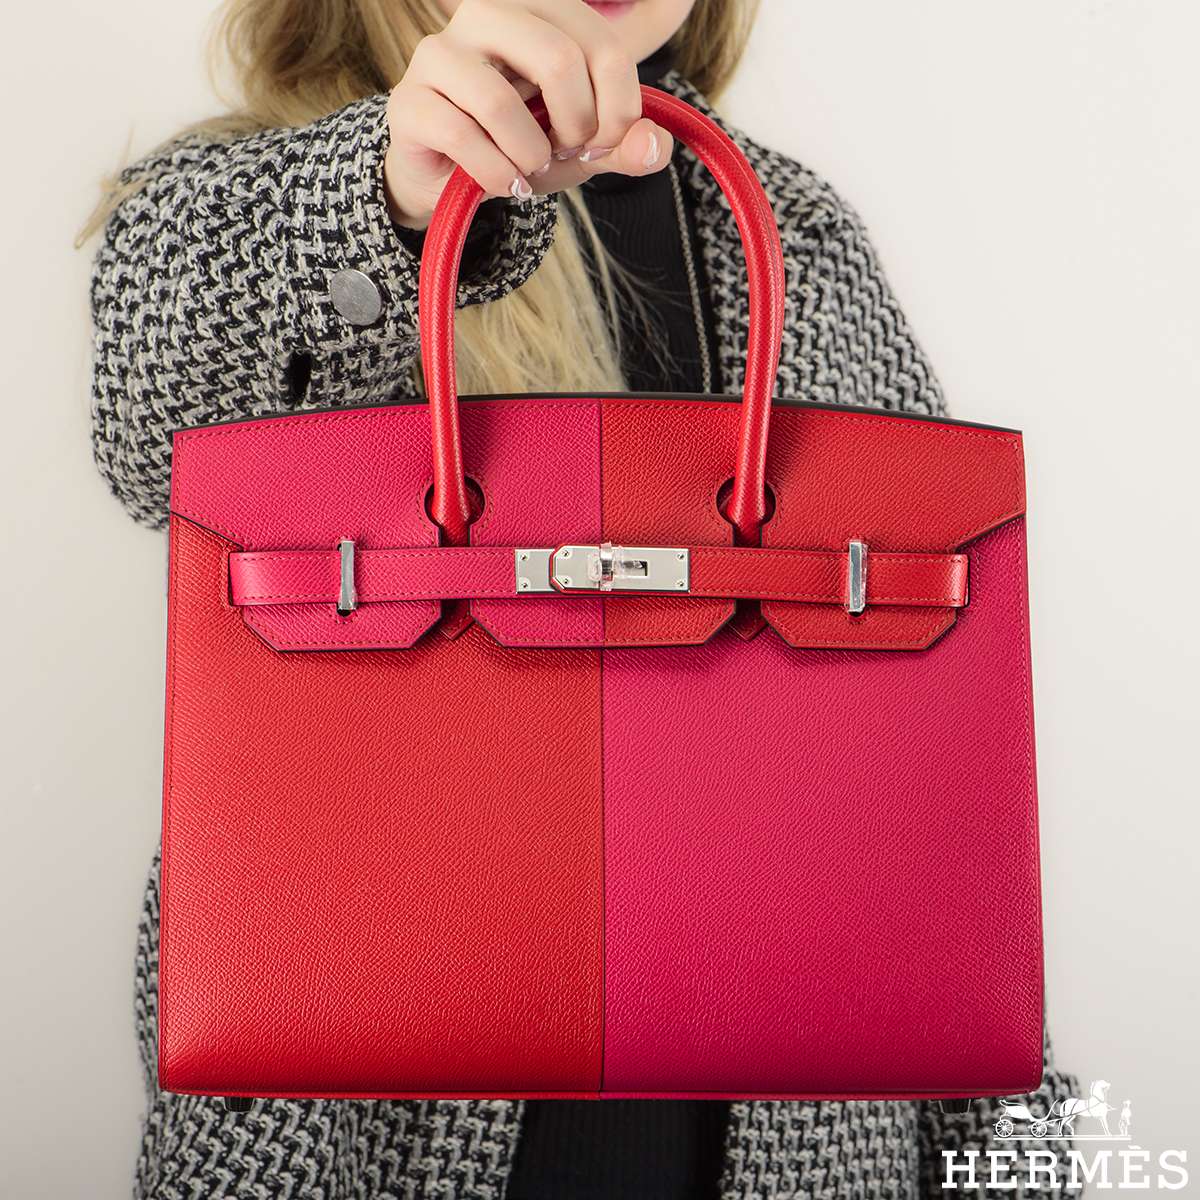 The French Hunter on X: Kelly 25 Rouge Casaque Sellier Epsom GHW #T  #hermes #birkin #kelly #constance #handbags #luxury   / X